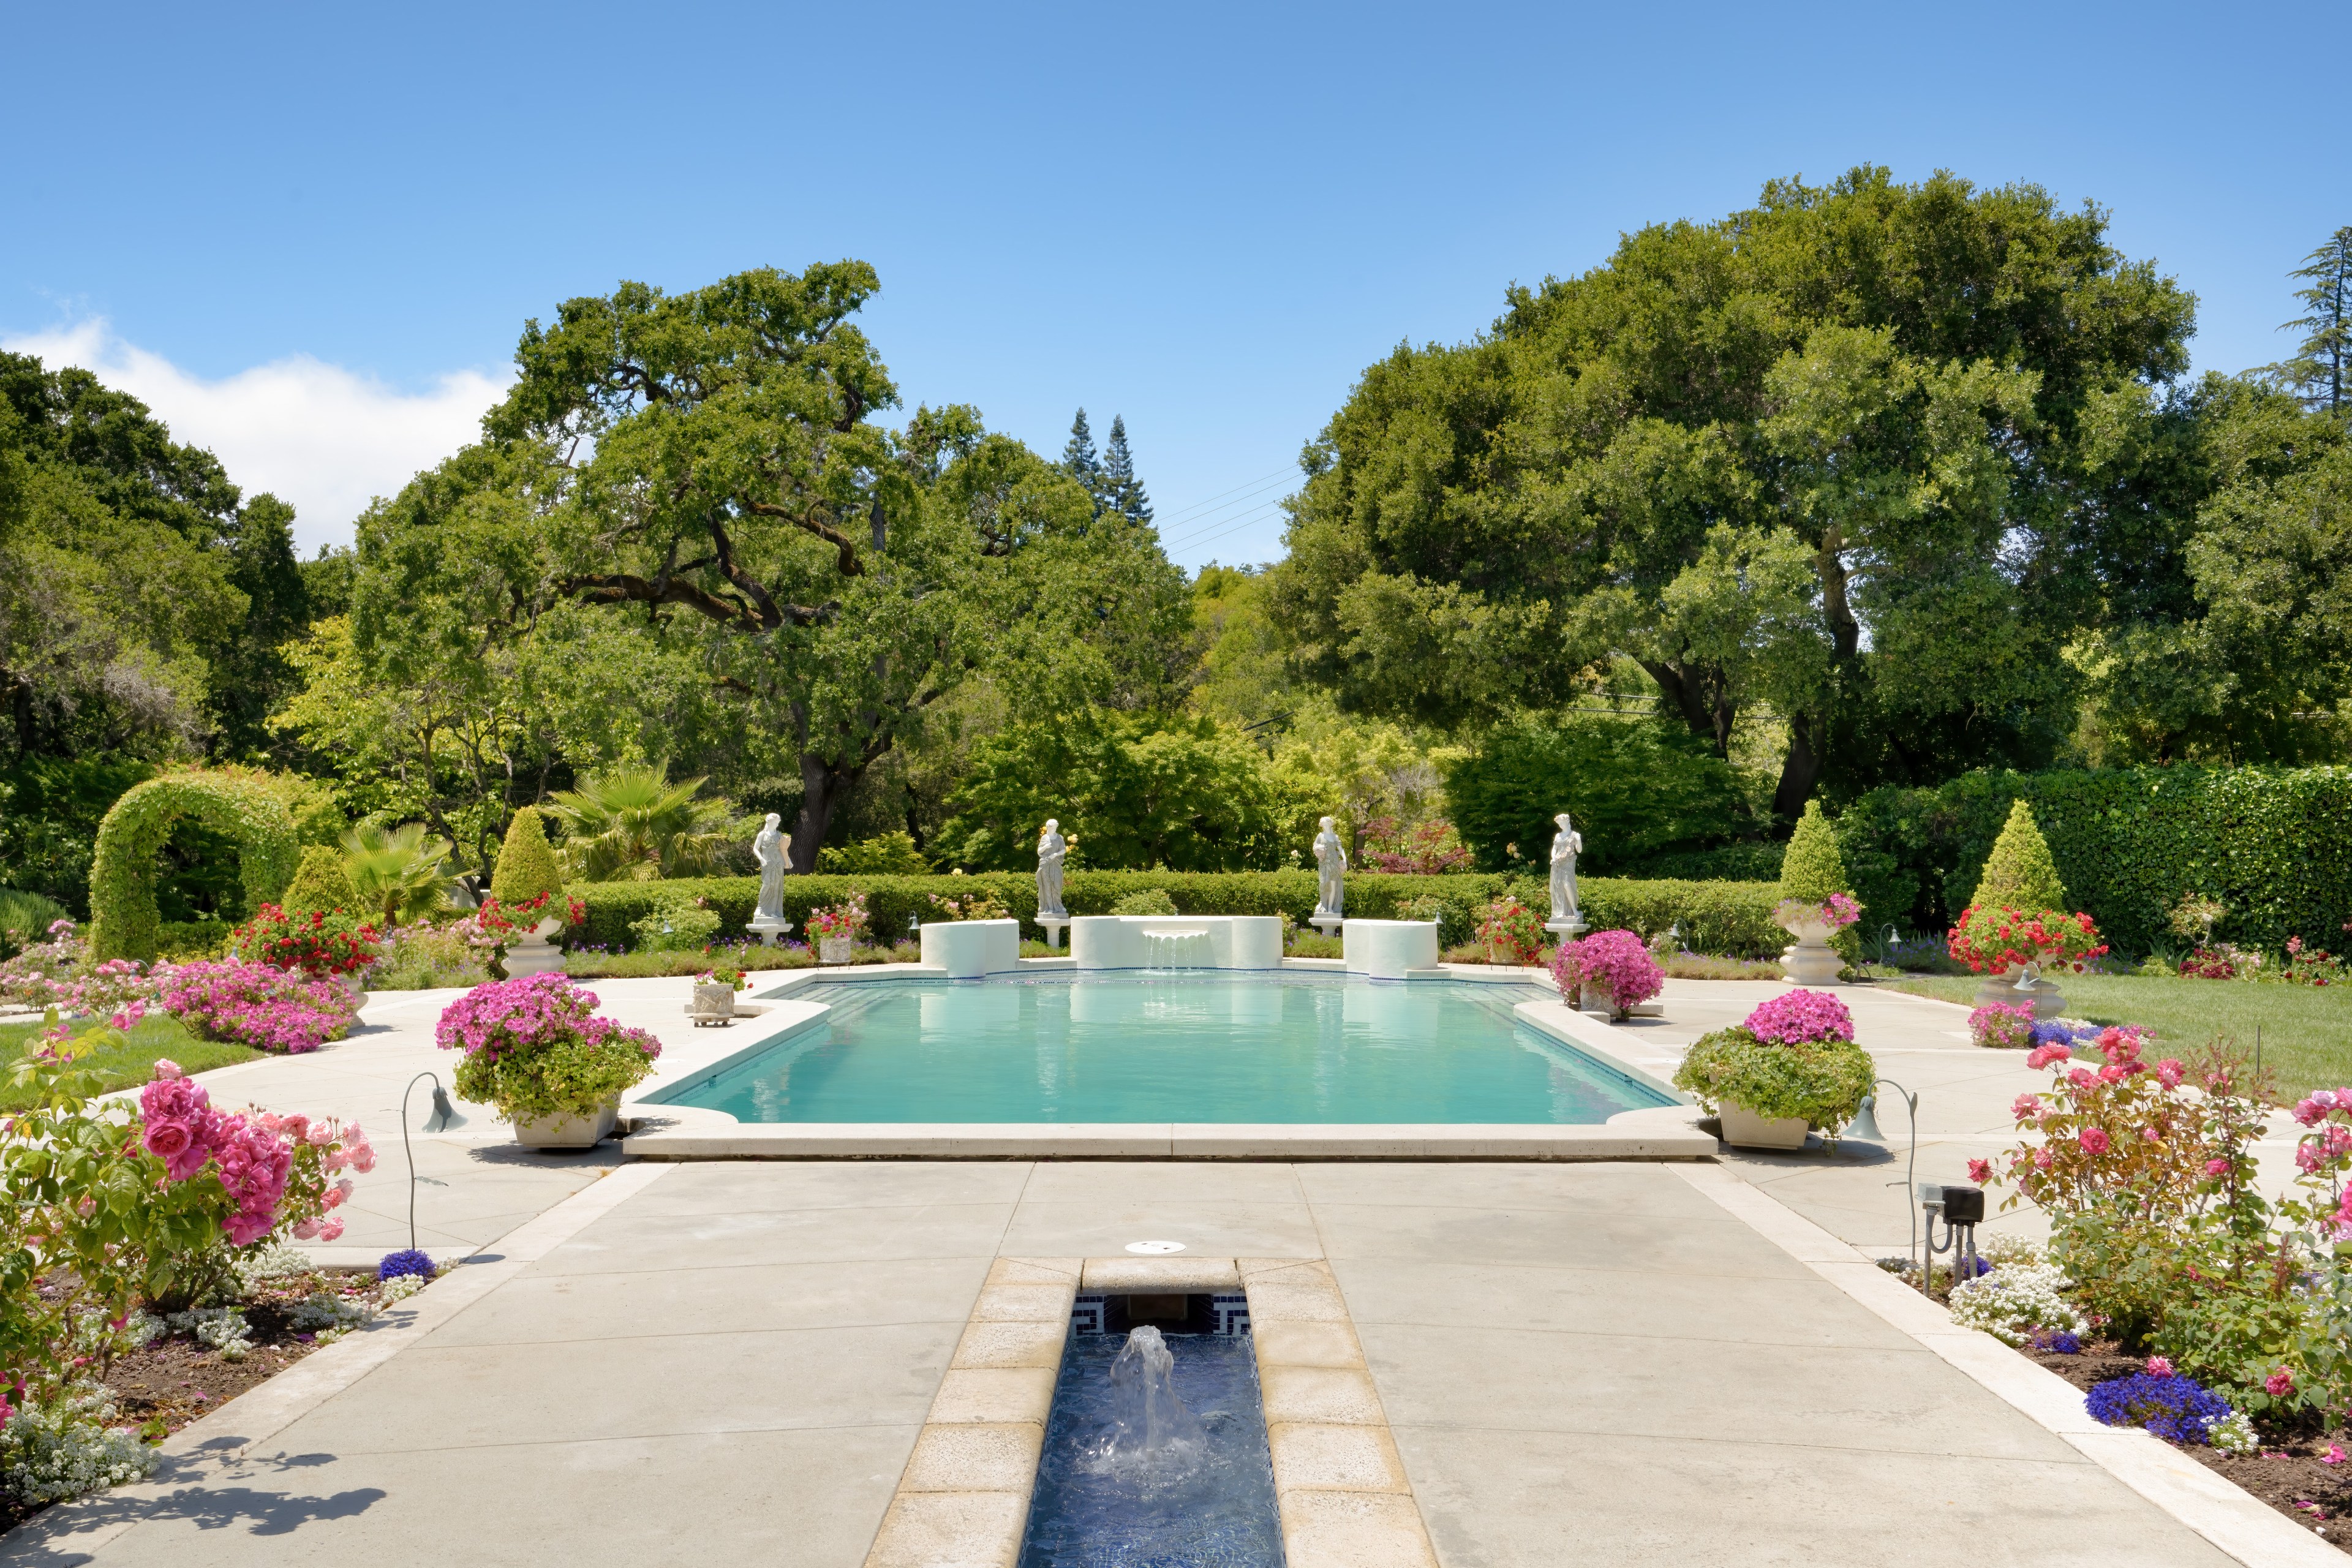 A swimming pool shimmers in sunlight next to flowers, a small fountain and a line of trees